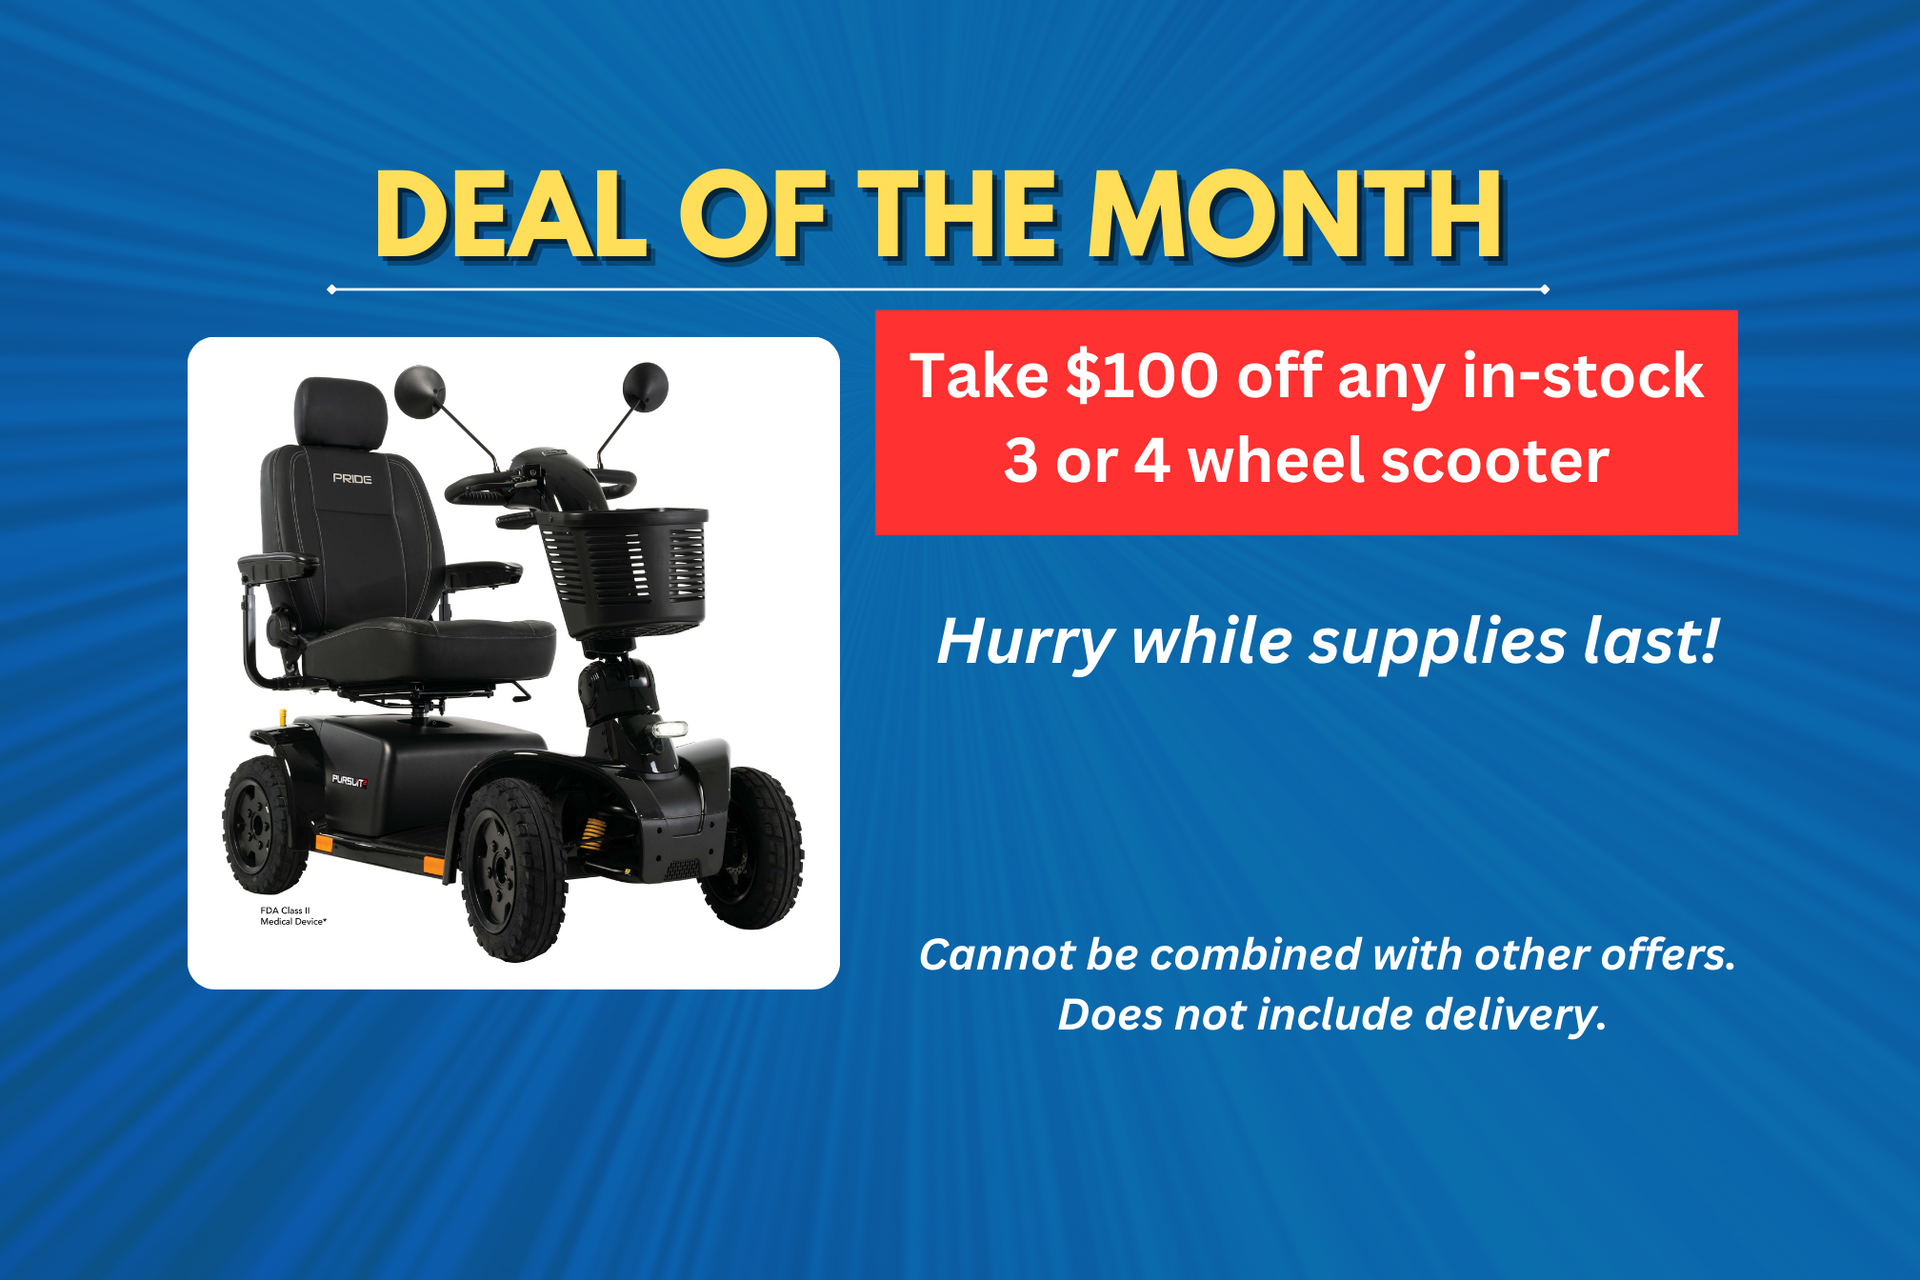 An advertisement for $100 off any in-stock 3 or 4 wheel scooter